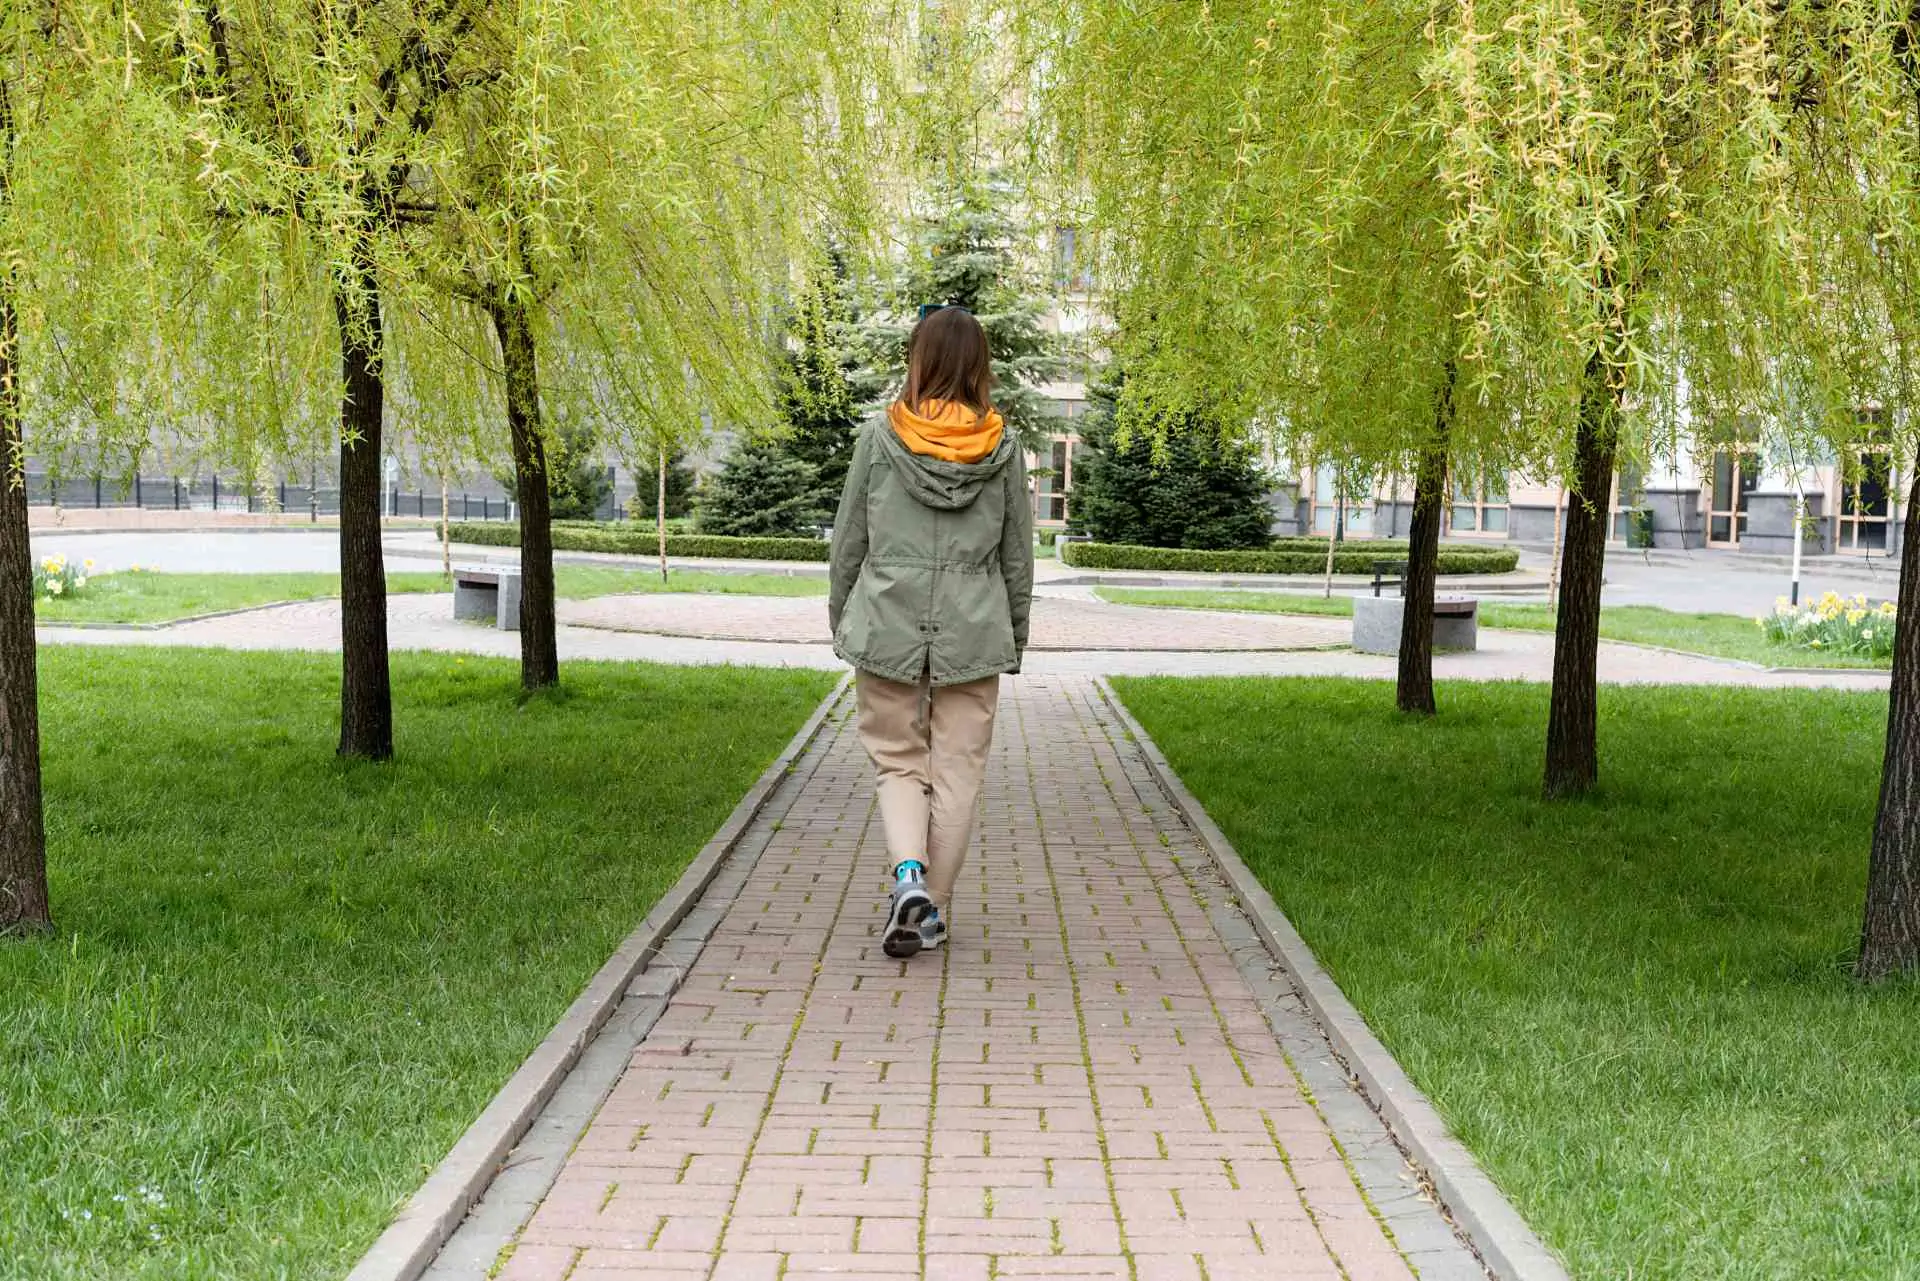 A rear view of a young woman walking down a serene, tree-lined path, embodying the forward movement and personal growth associated with positive change.